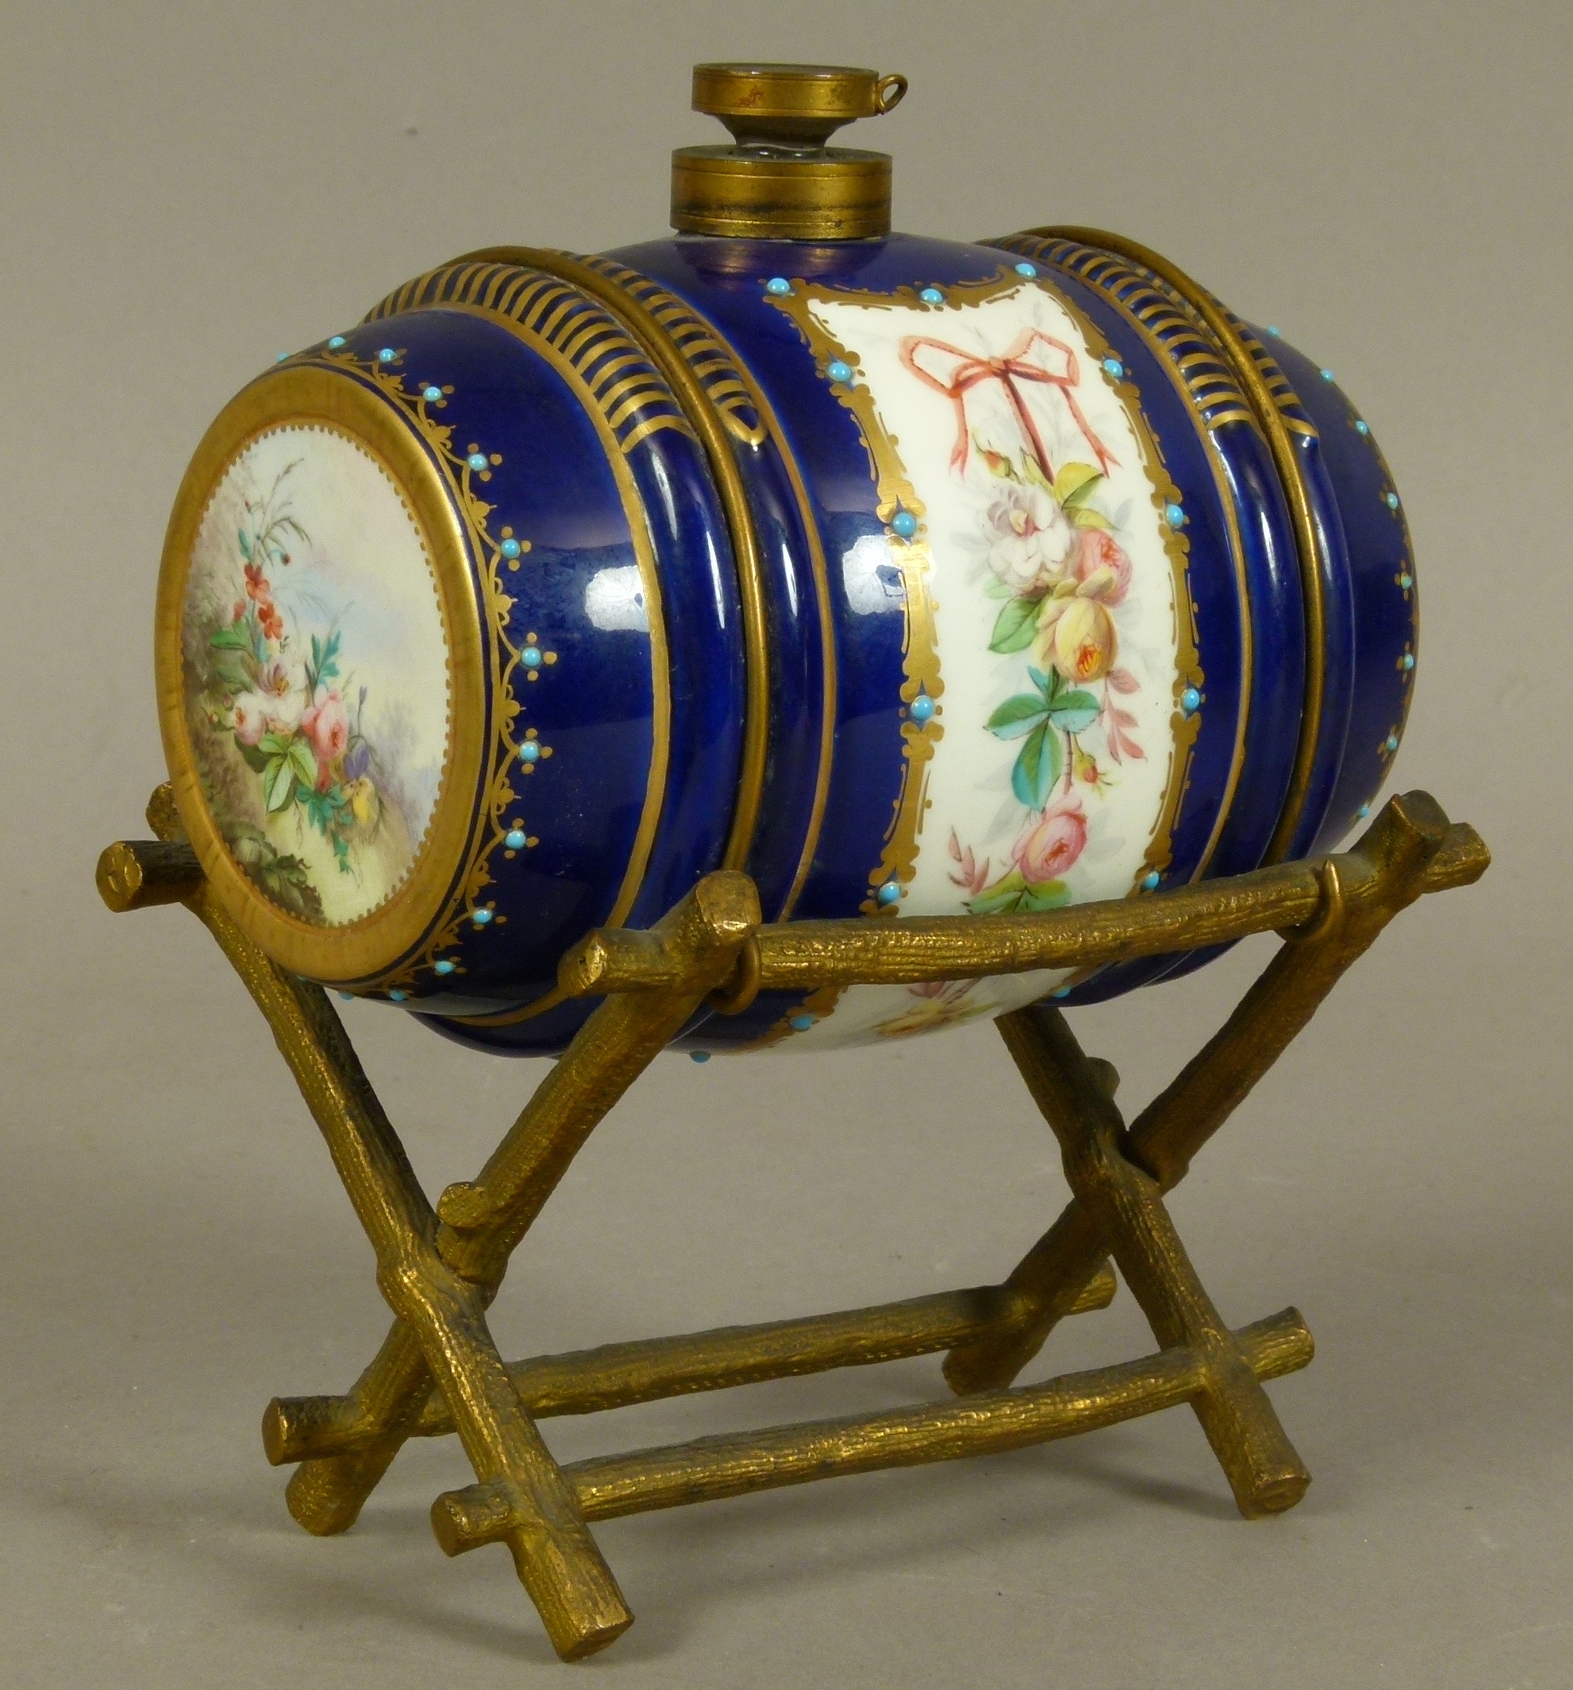 A LATE 19TH CENTURY FRENCH PORCELAIN AND GILT-BRONZE MOUNTED SPIRIT BARREL, the porcelain barrel - Image 4 of 5